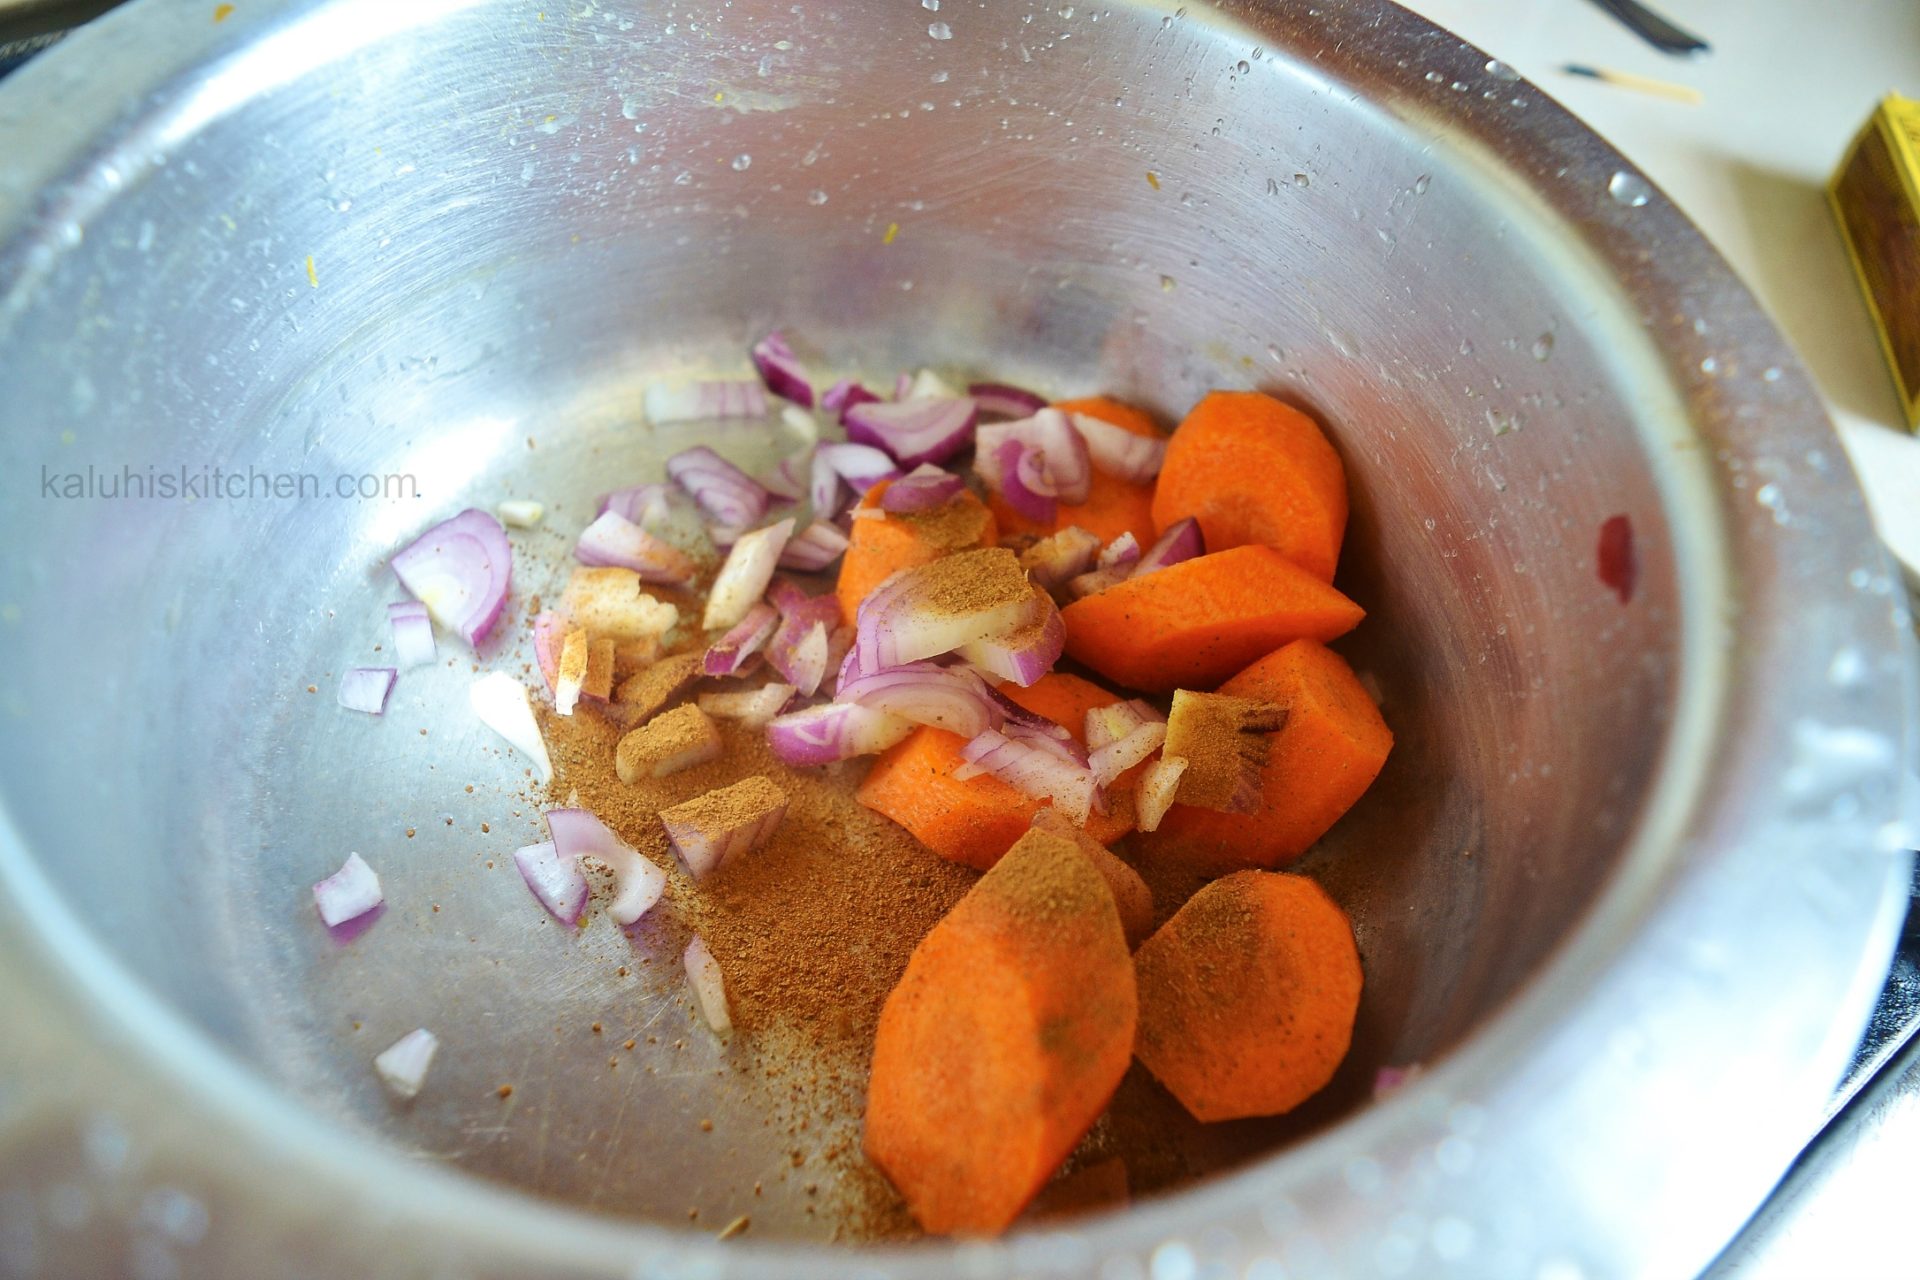 boil the carrots until tender with some onion and cinnamon for the pumpkin soup_kaluhiskitchen.com